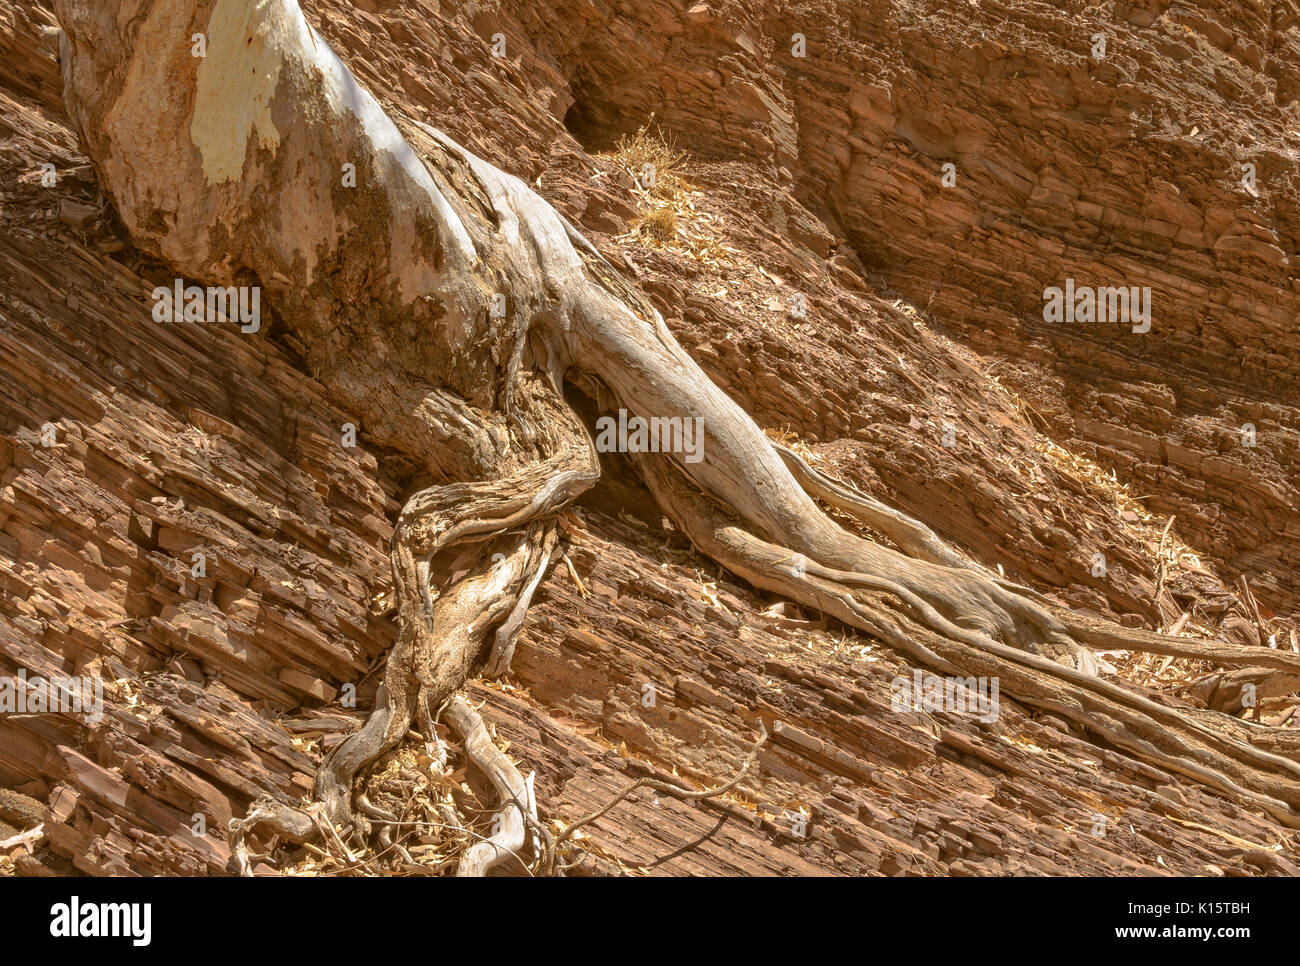 A river red gum in Brachina Gorge hangs on the ancient rocks by its partly exposed  roots - Flinders Ranges, SA, Australia Stock Photo